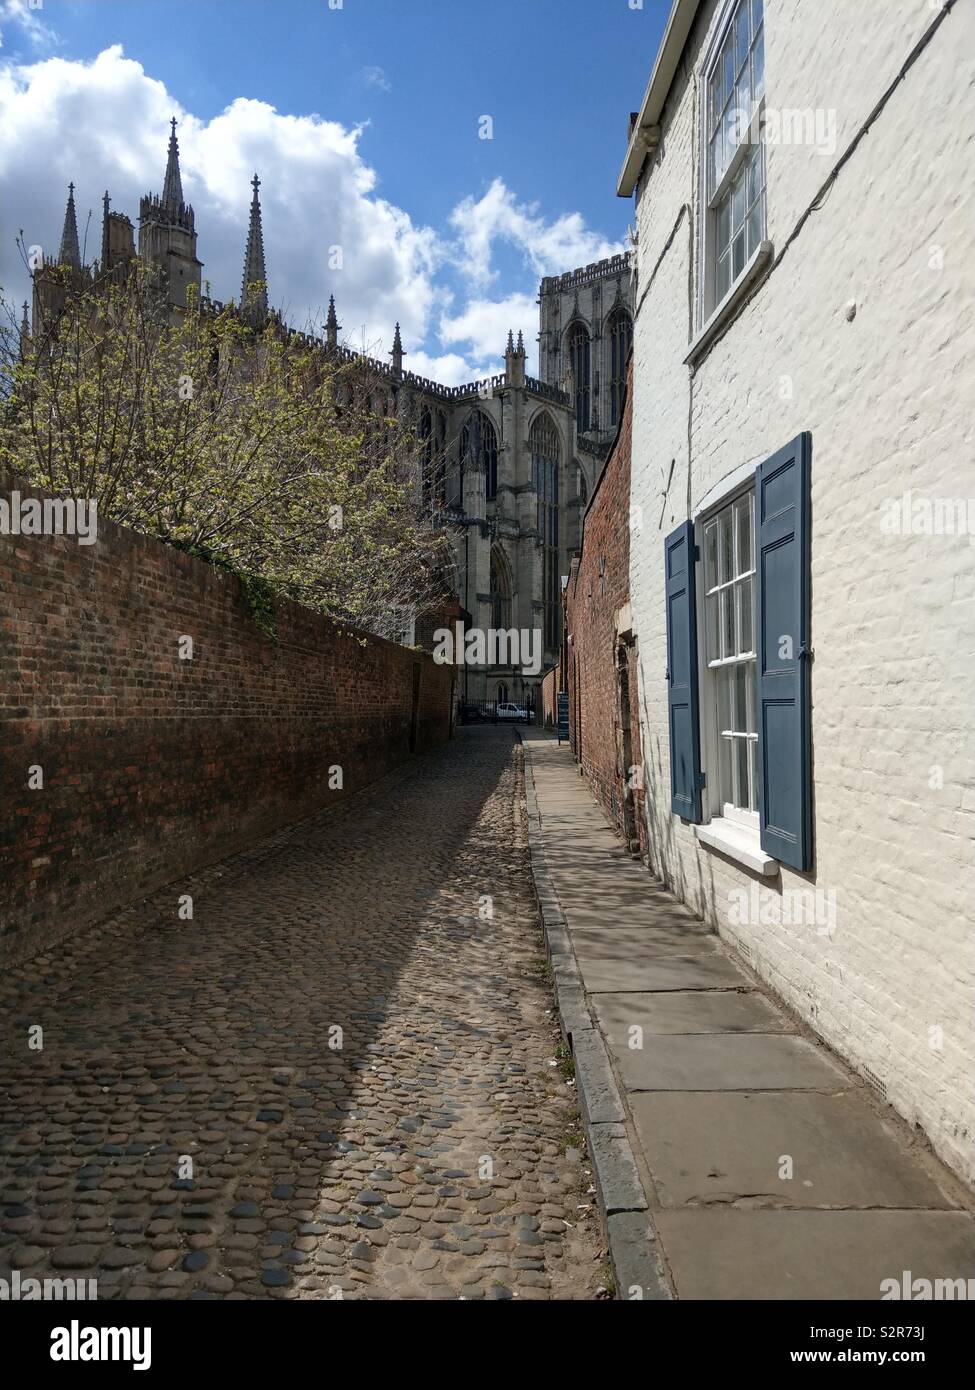 A cobbled street in York leading to the magnificent gothic splendour of York Minster Stock Photo